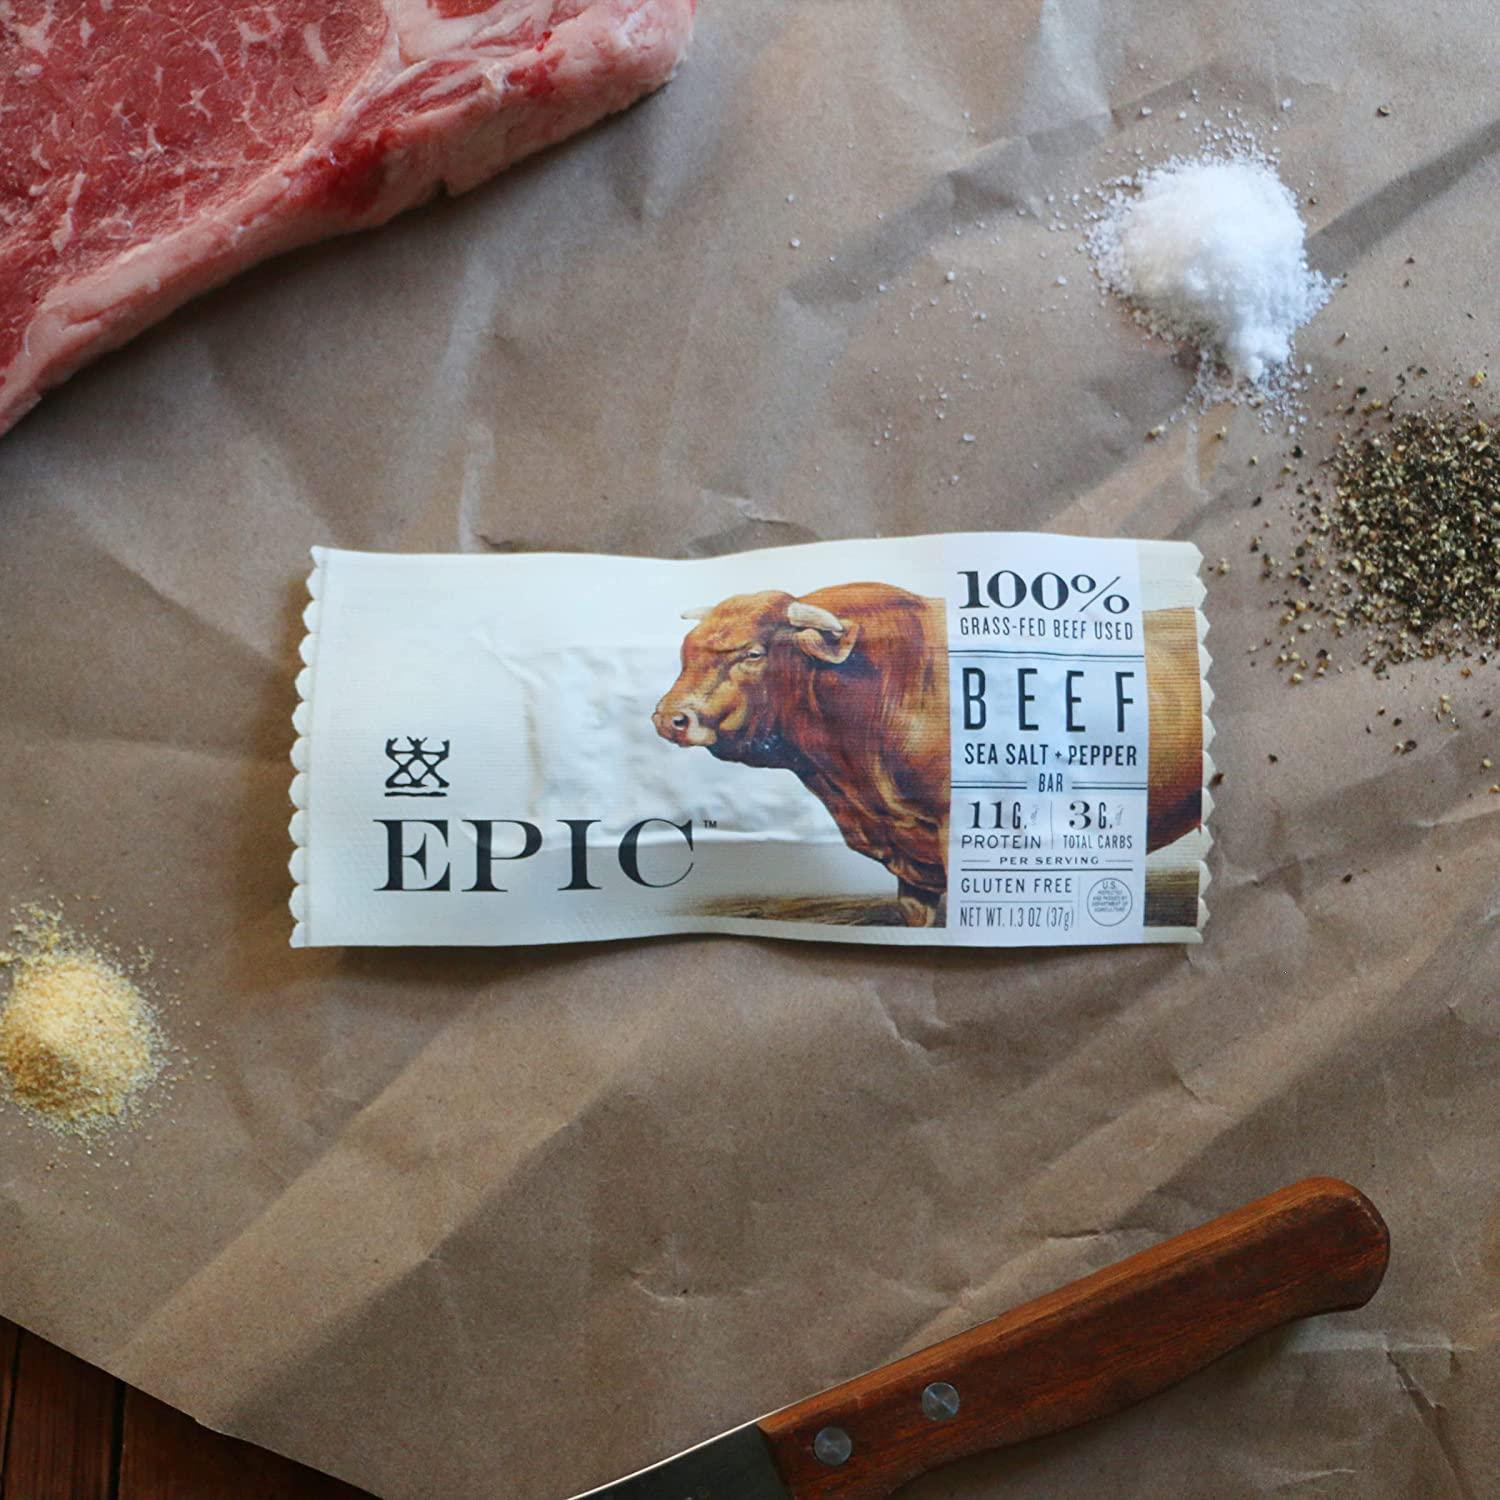  EPIC Bison Bacon Cranberry Bars, Grass-Fed, 12 Count